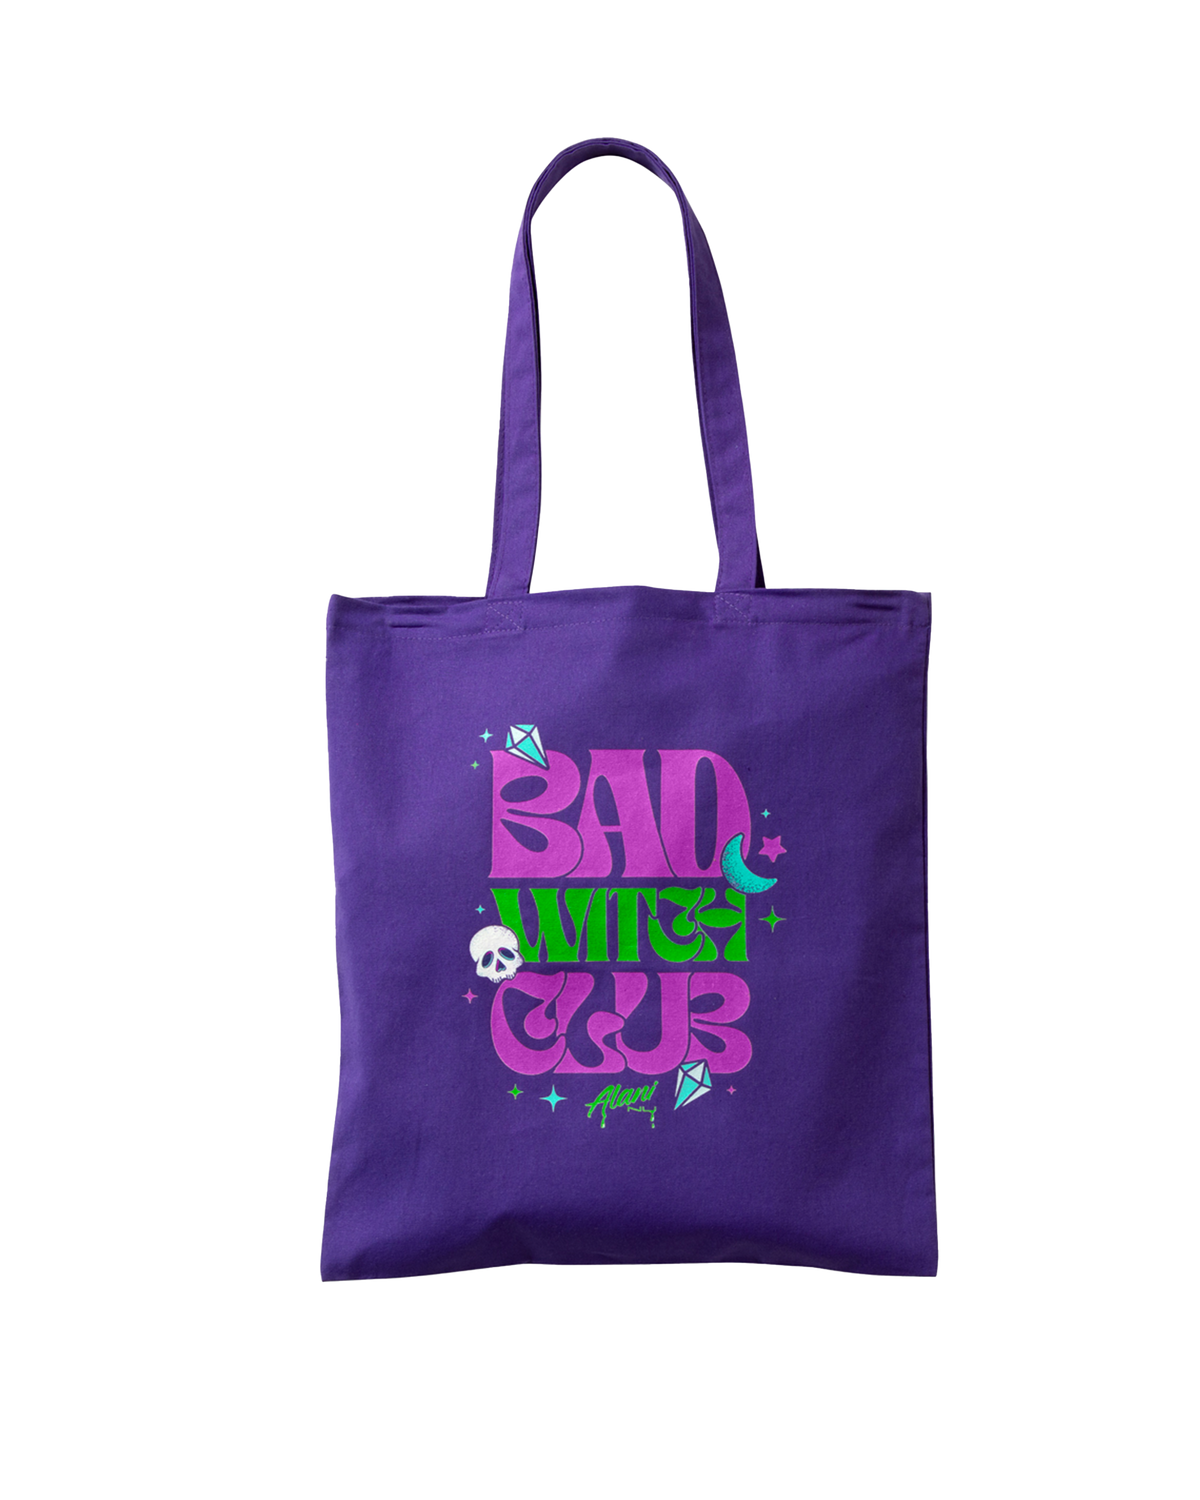 A Witch's Brew tote bag with a purple and green logo stating bad witch club.